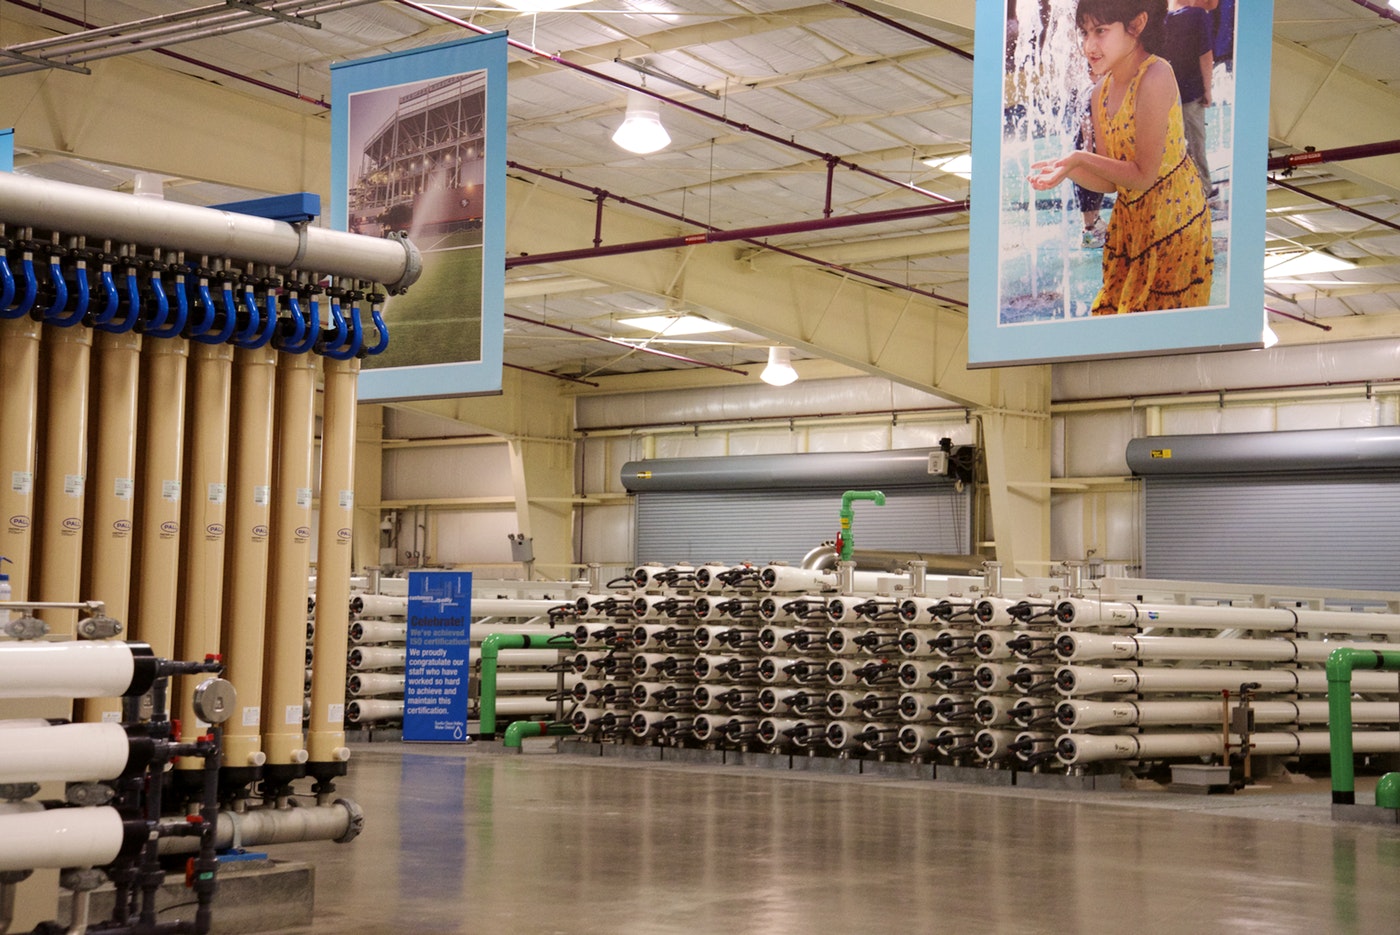 A view inside the Silicon Valley Advanced Water Purification Center in San Jose, Calif. (Tara Lohan)